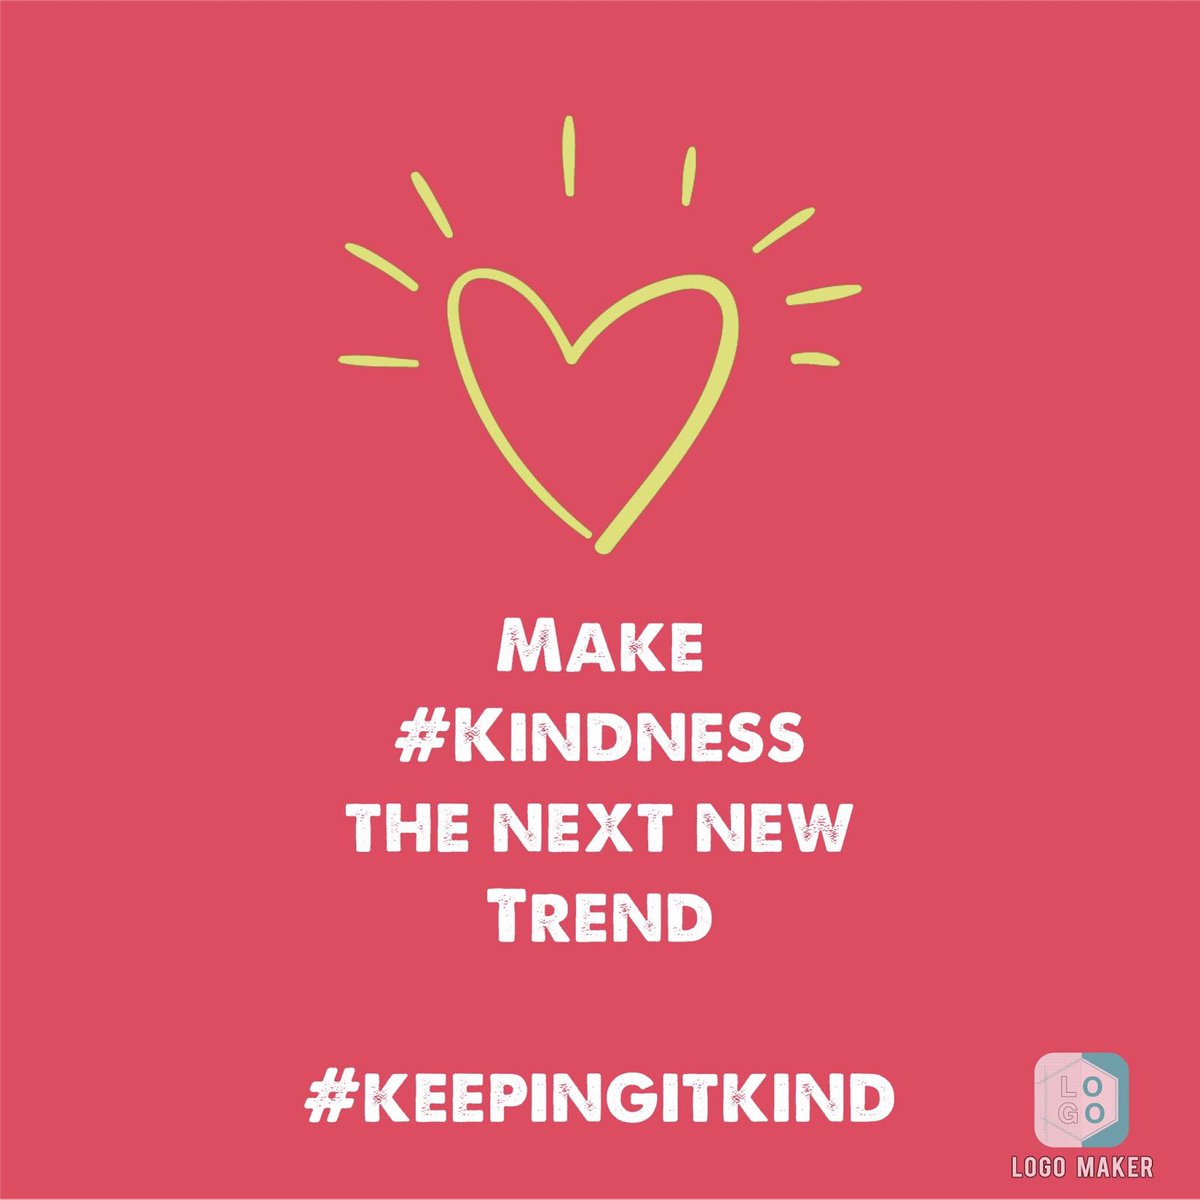 2/2 theres ALWAYS a WHY. Its this question that helps us to identify the people who most need our empathy & kindness. A cry 4 help is not always 1 short yell. Sometimes it is a continuous scream throughout a lifetime. Be gentle. Be more compassionate. Be kind  #keepingitkind2021